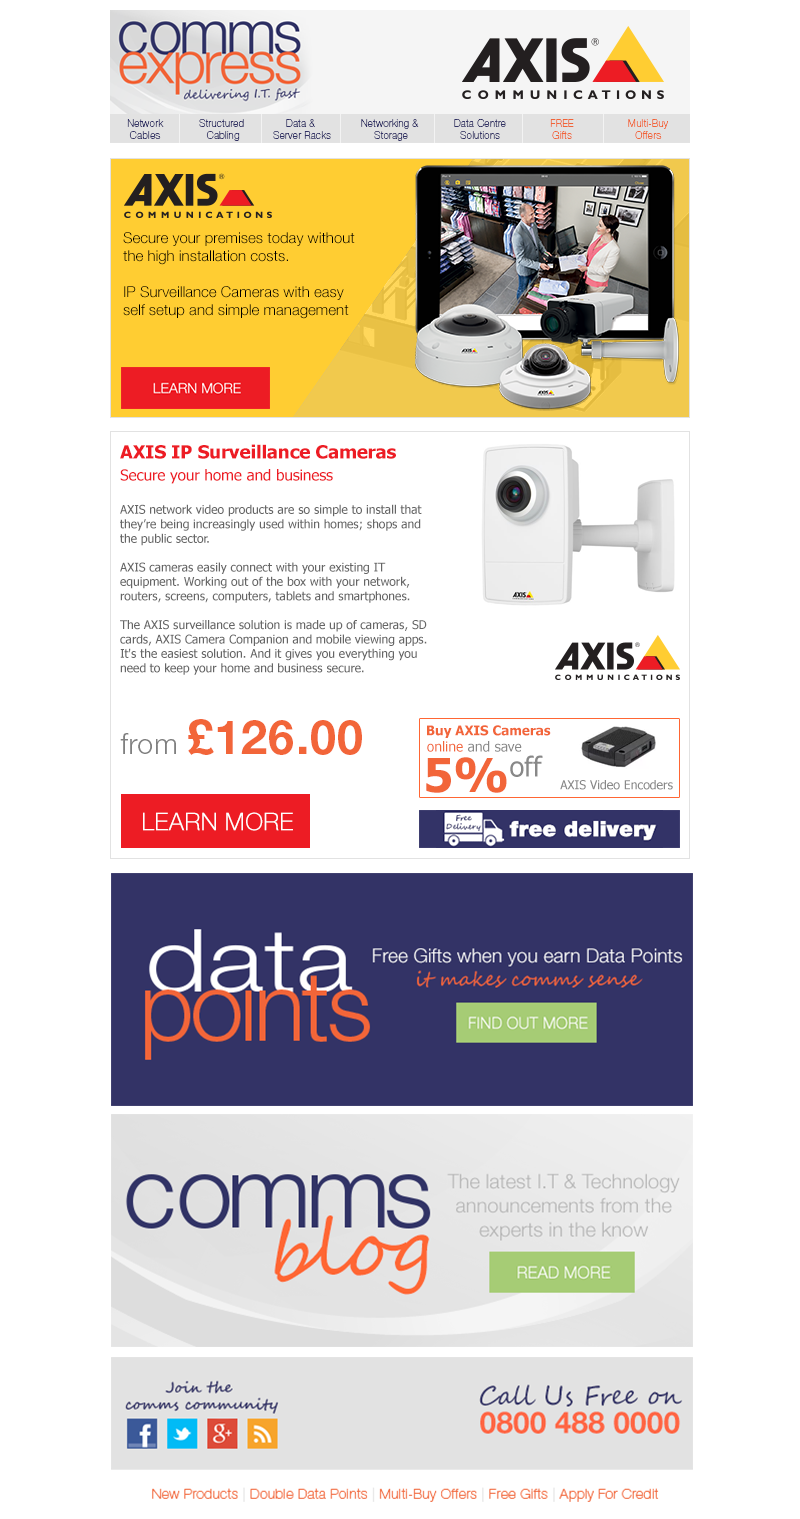 With easy installation secure your premises with AXIS T